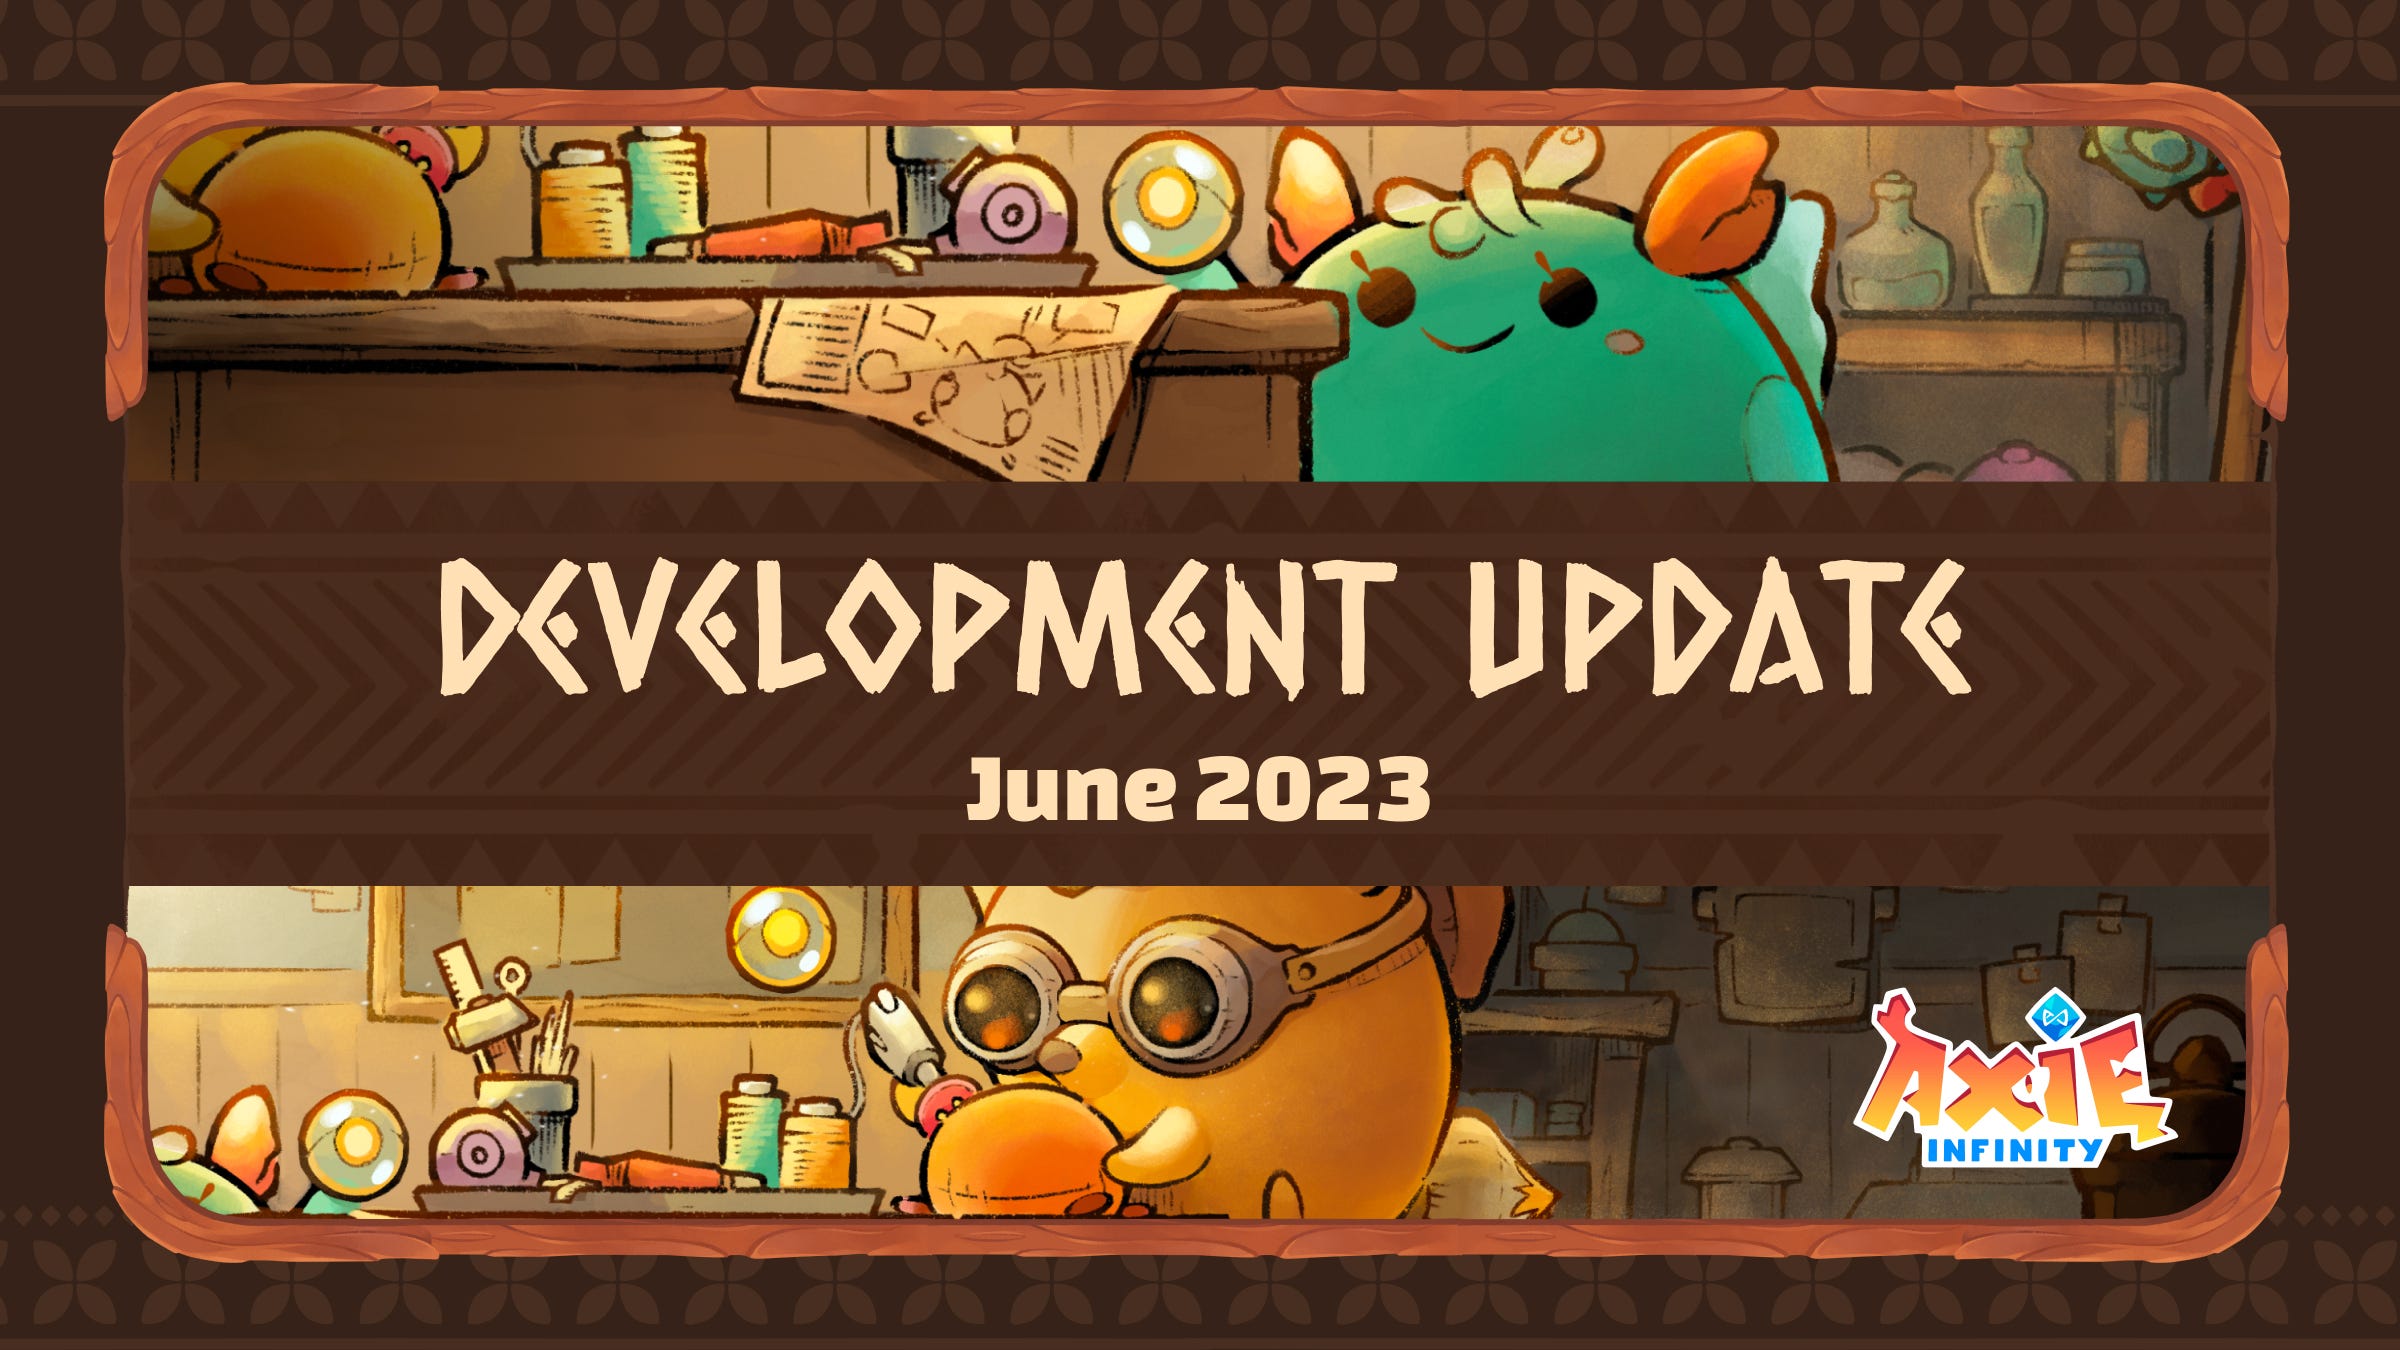 Axie Infinity Season 4 is Live with New Features!